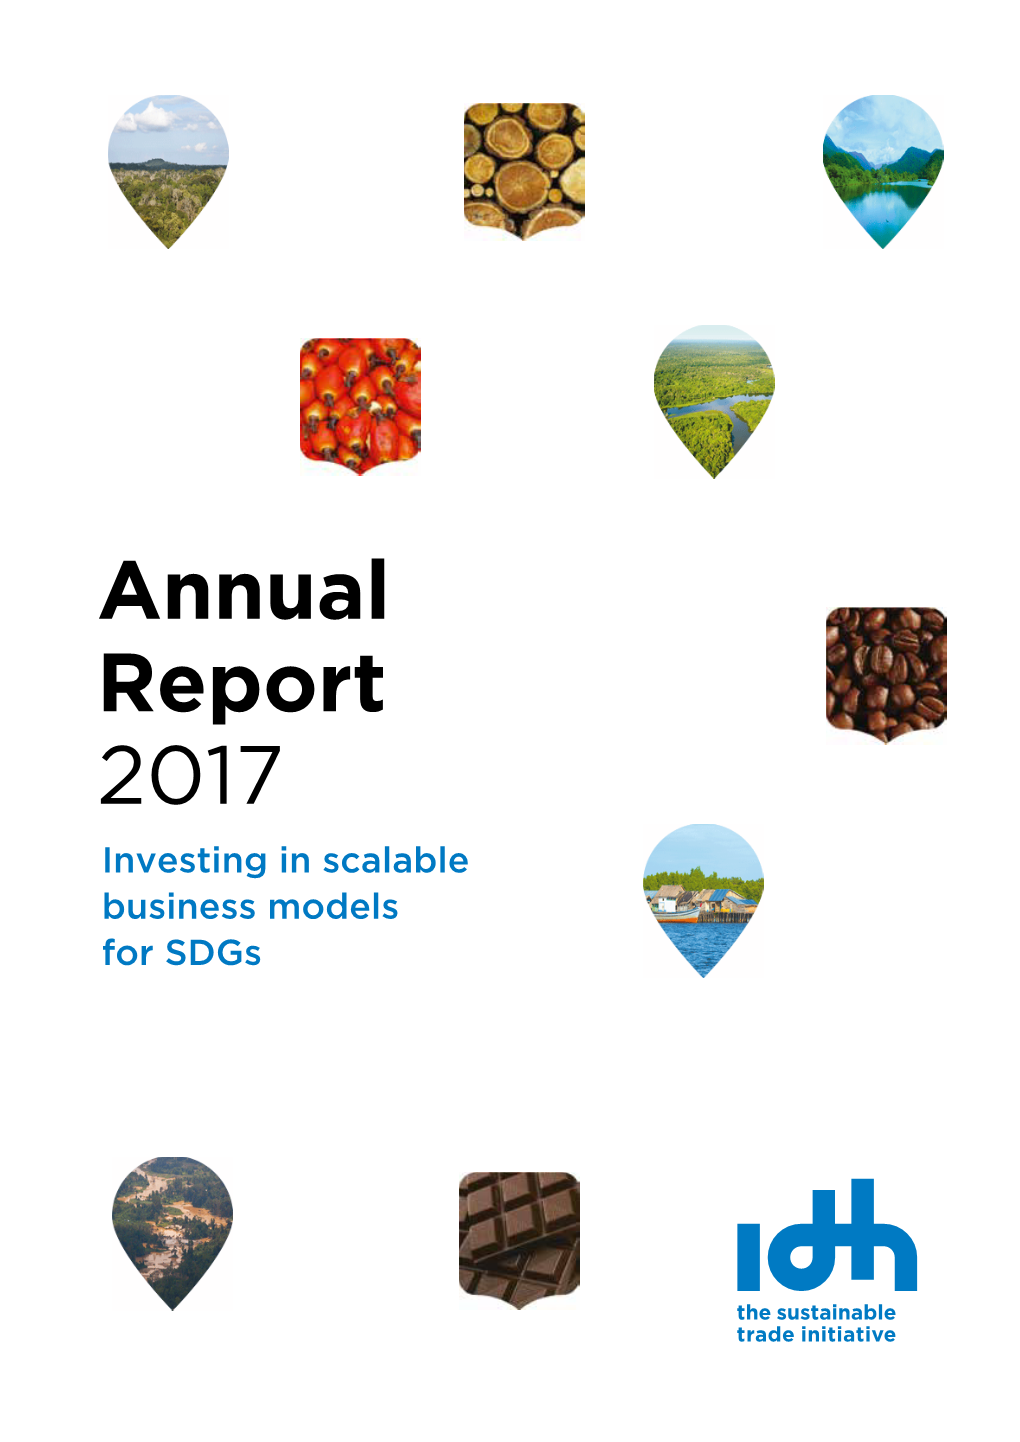 Annual Report 2017 Investing in Scalable Business Models for Sdgs